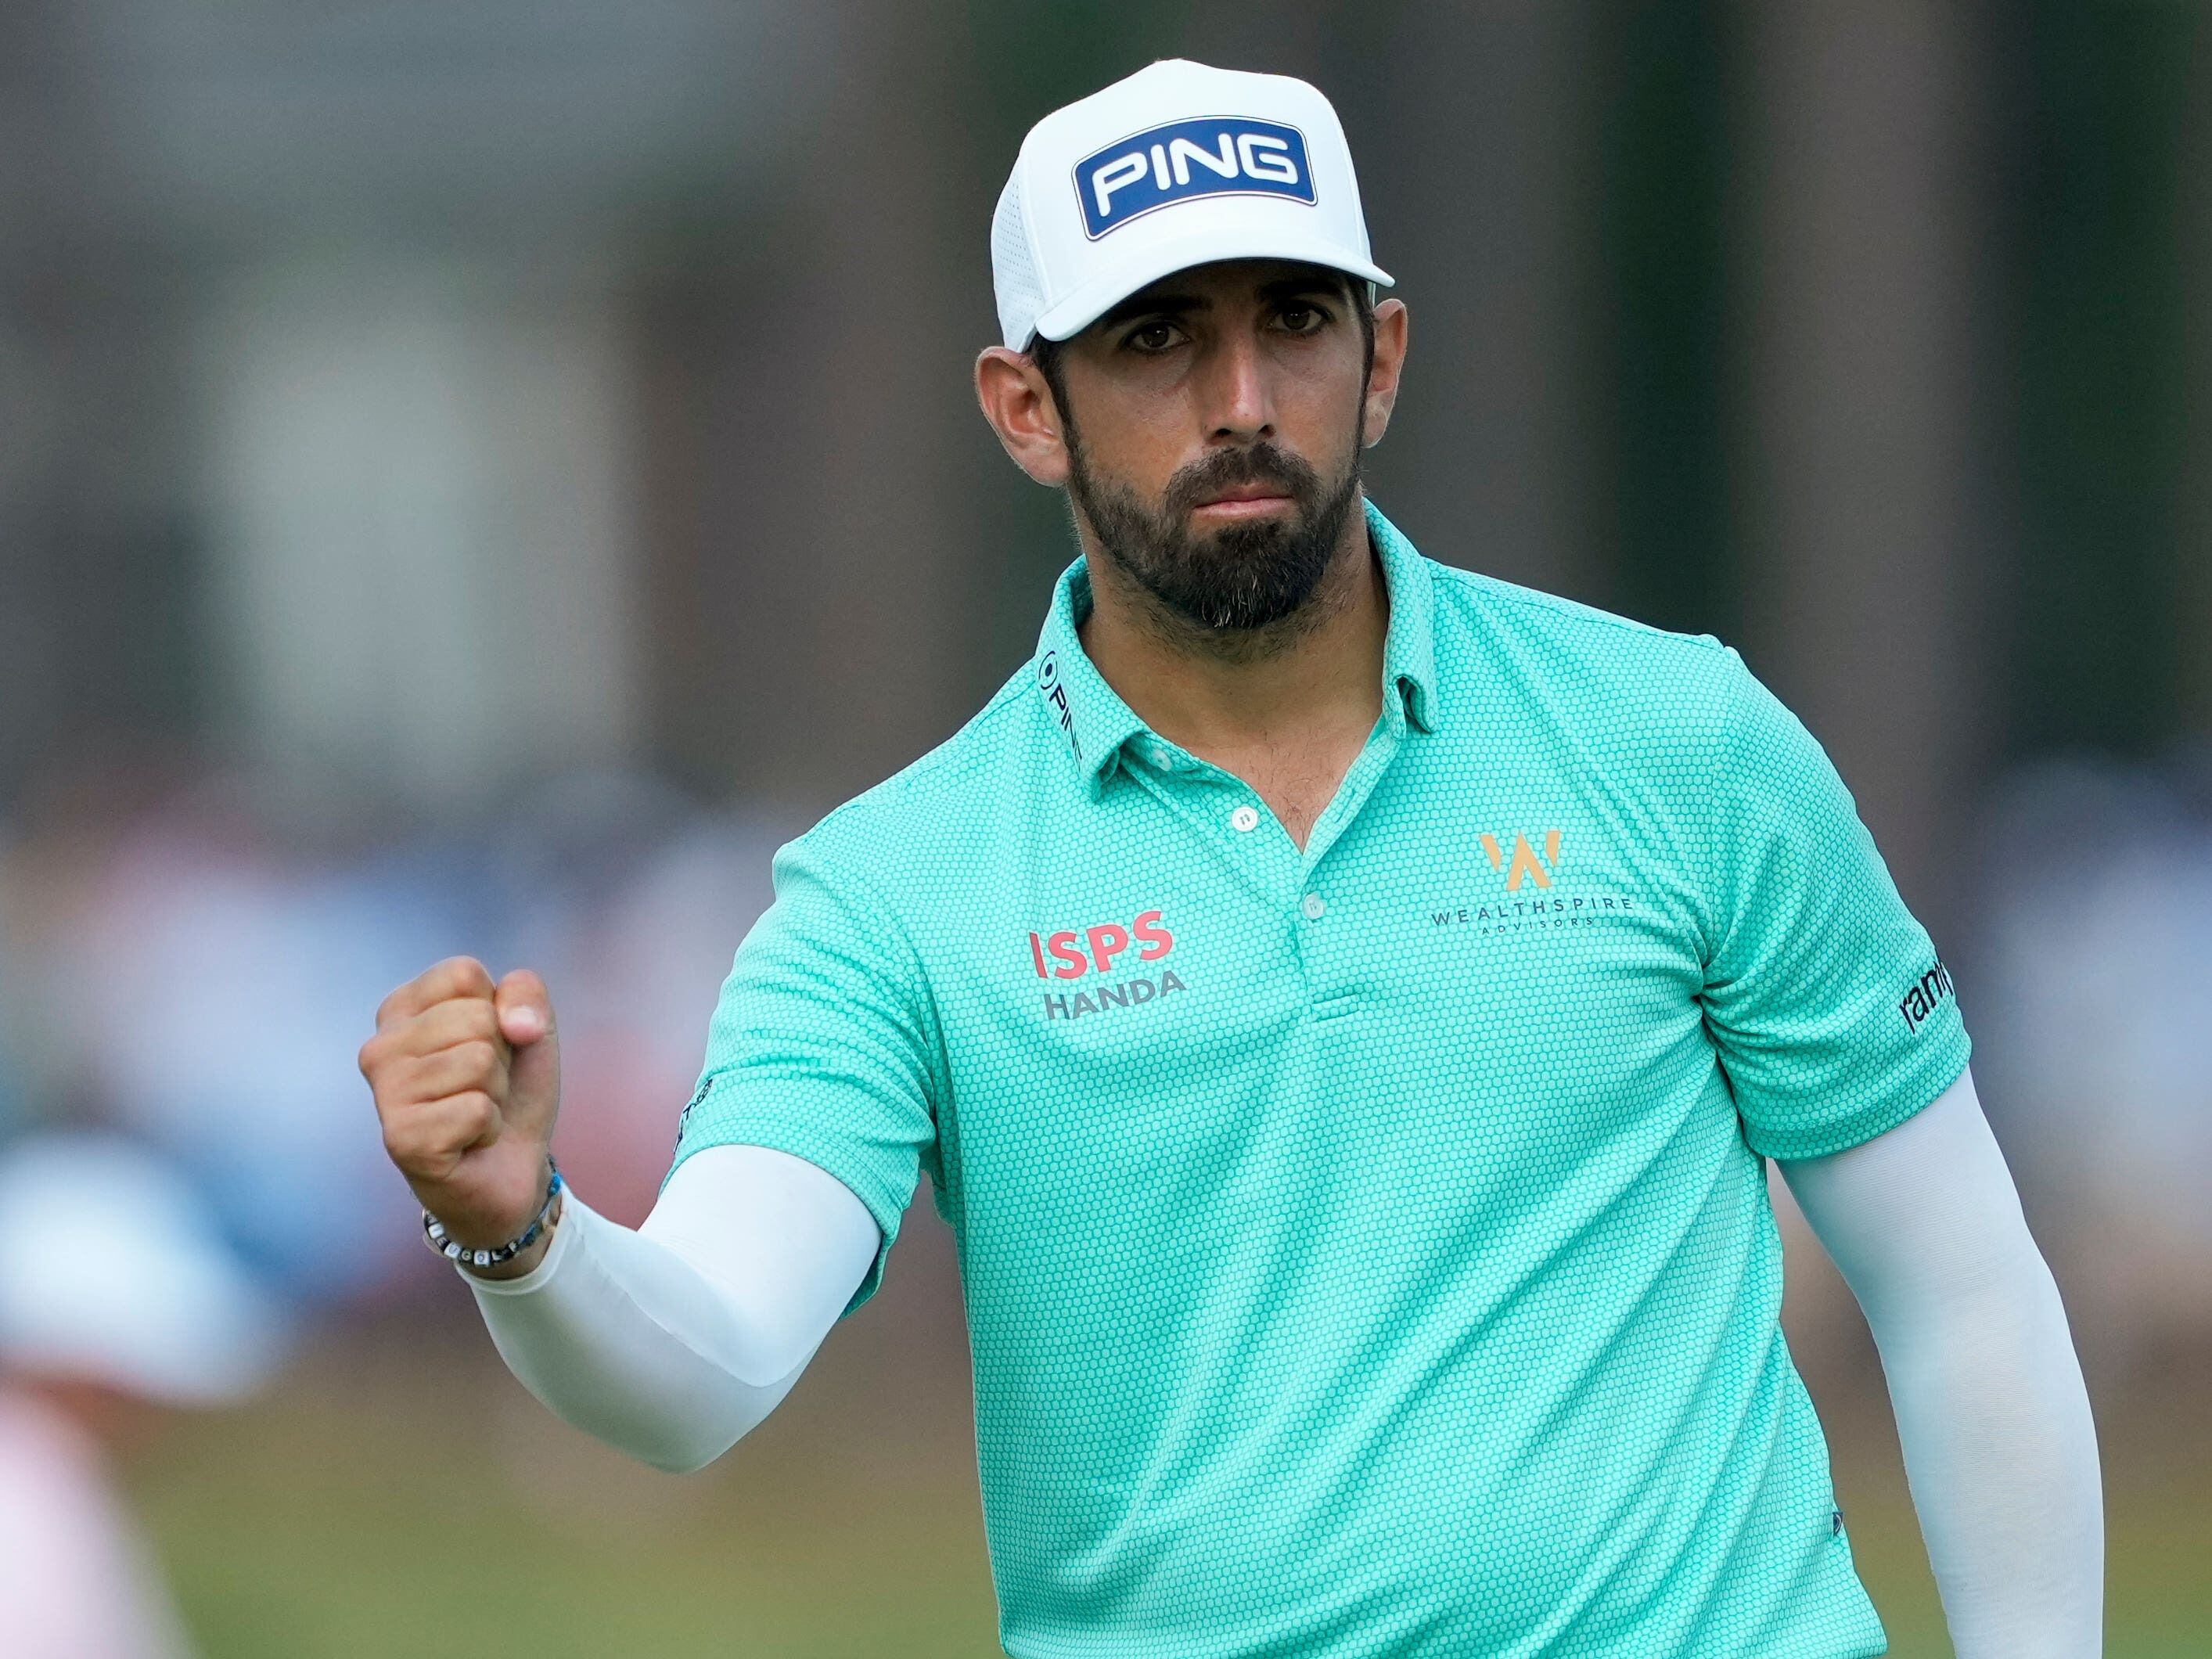 Matthieu Pavon leads US Open after ‘absolute mental torture’ for Shane Lowry